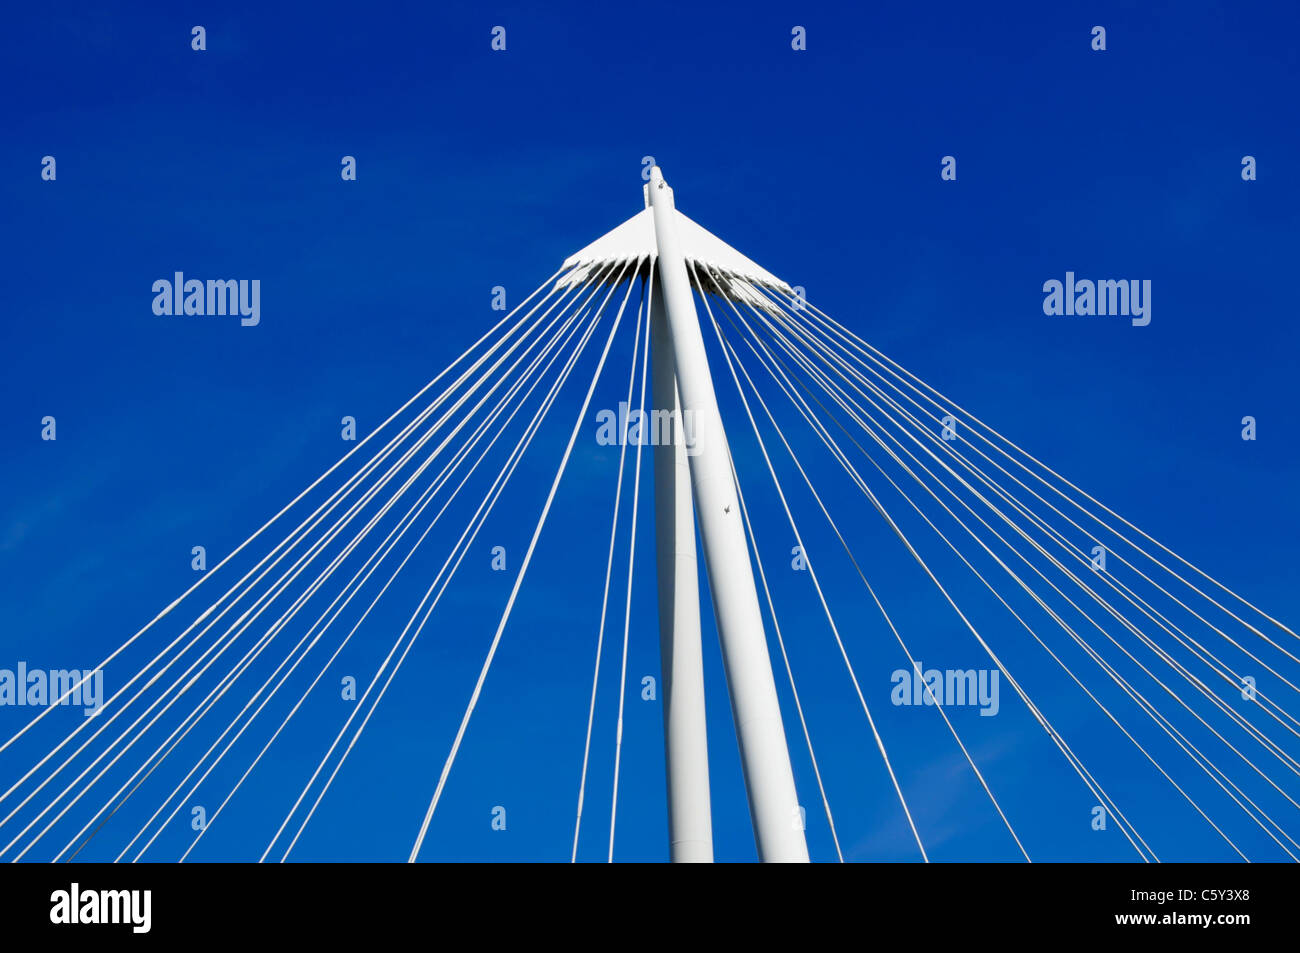 Geometric abstract architecture cluster of suspension bridge wire cables deep blue sky background pointing upwards in a triangle shape England UK Stock Photo